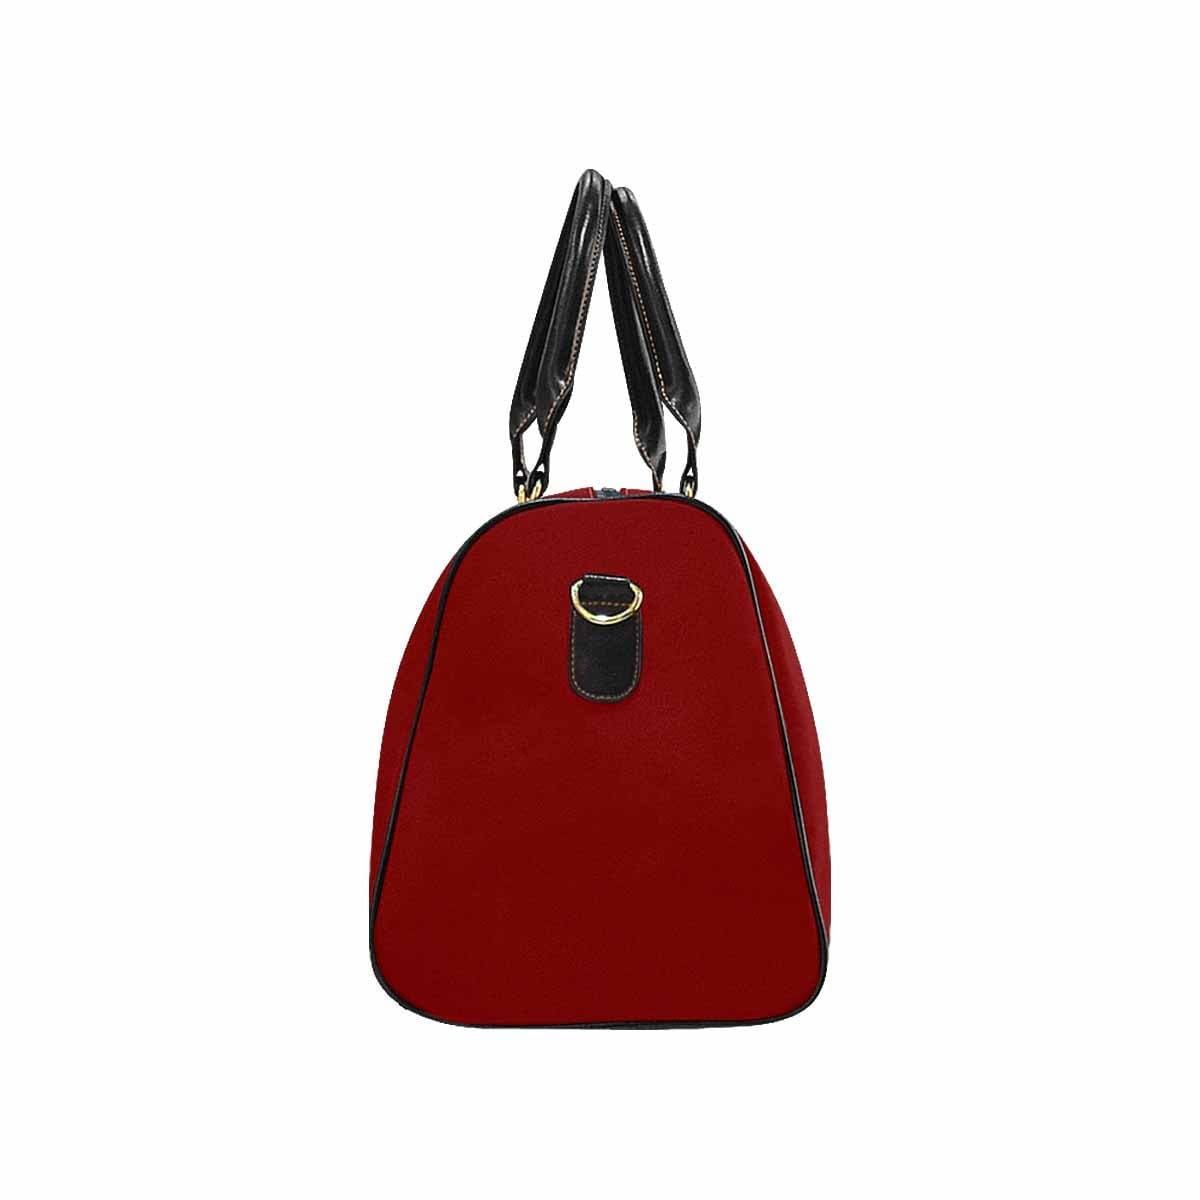 Travel Bag Leather Carry On Large Luggage Bag Maroon Red - Bags | Travel Bags |